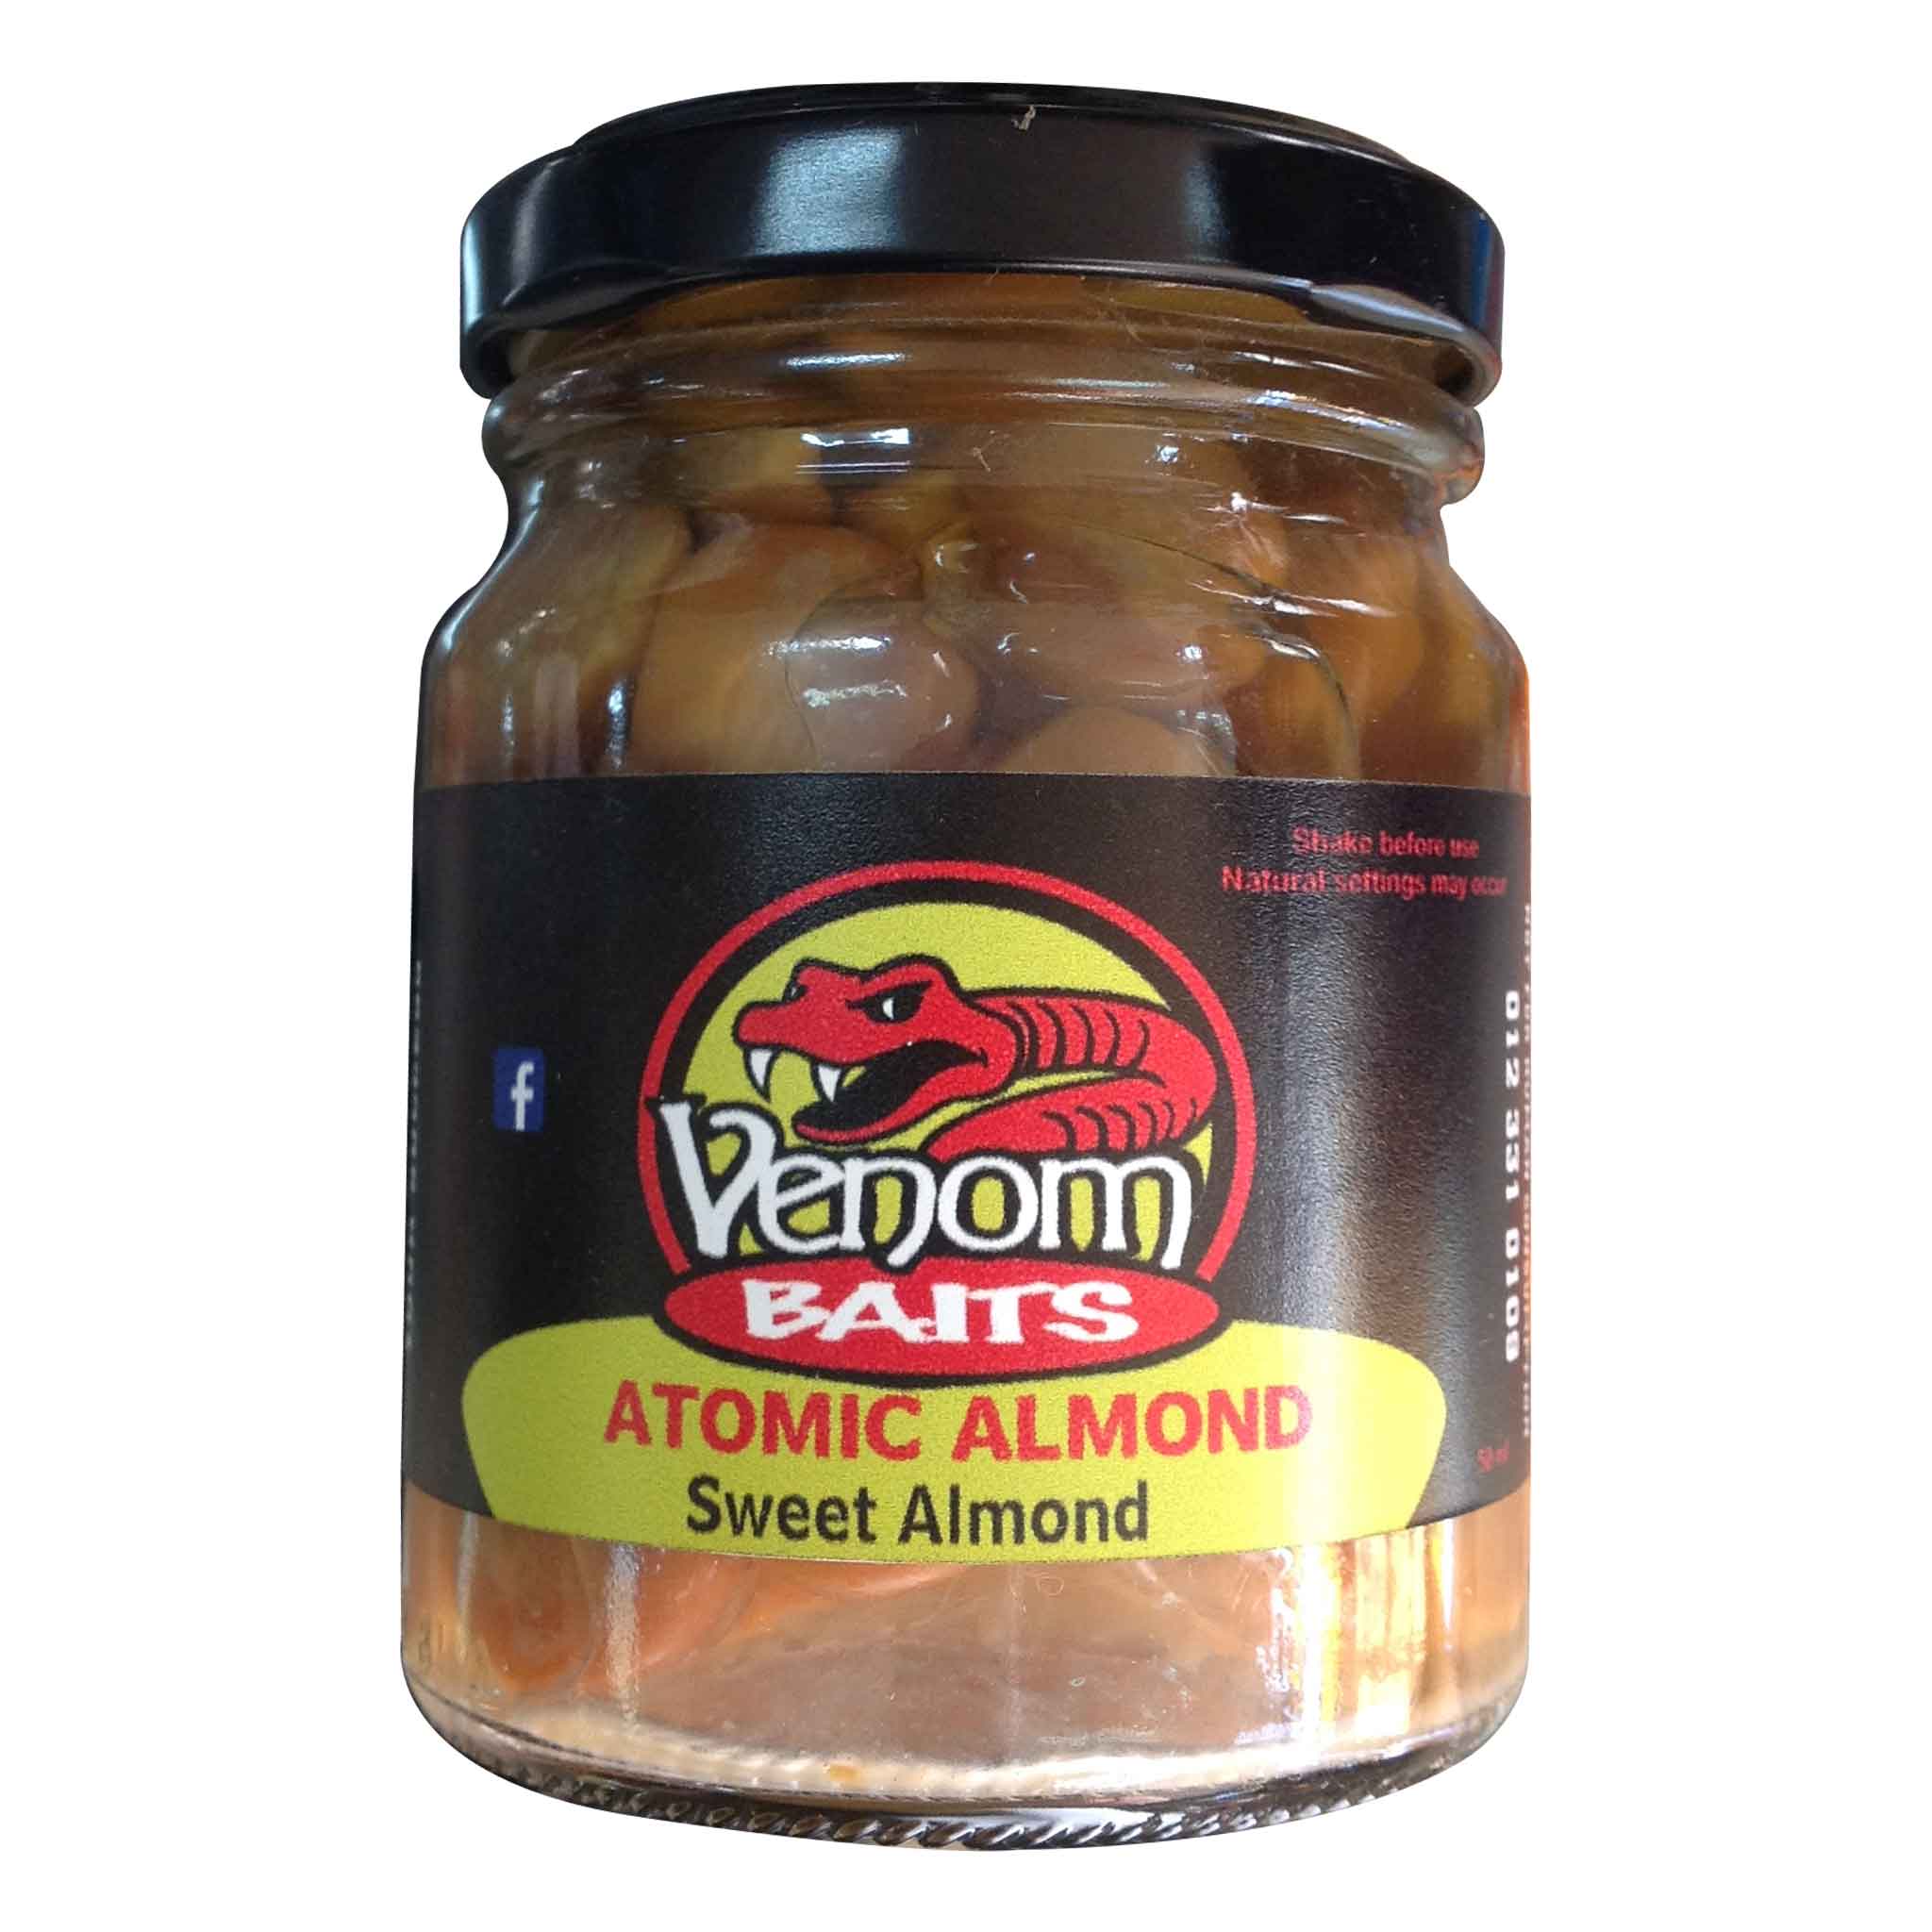 VENOM BAITS ATOMIC ALMOND SWEET ALMOND - Moosa's Angling And Outdoor